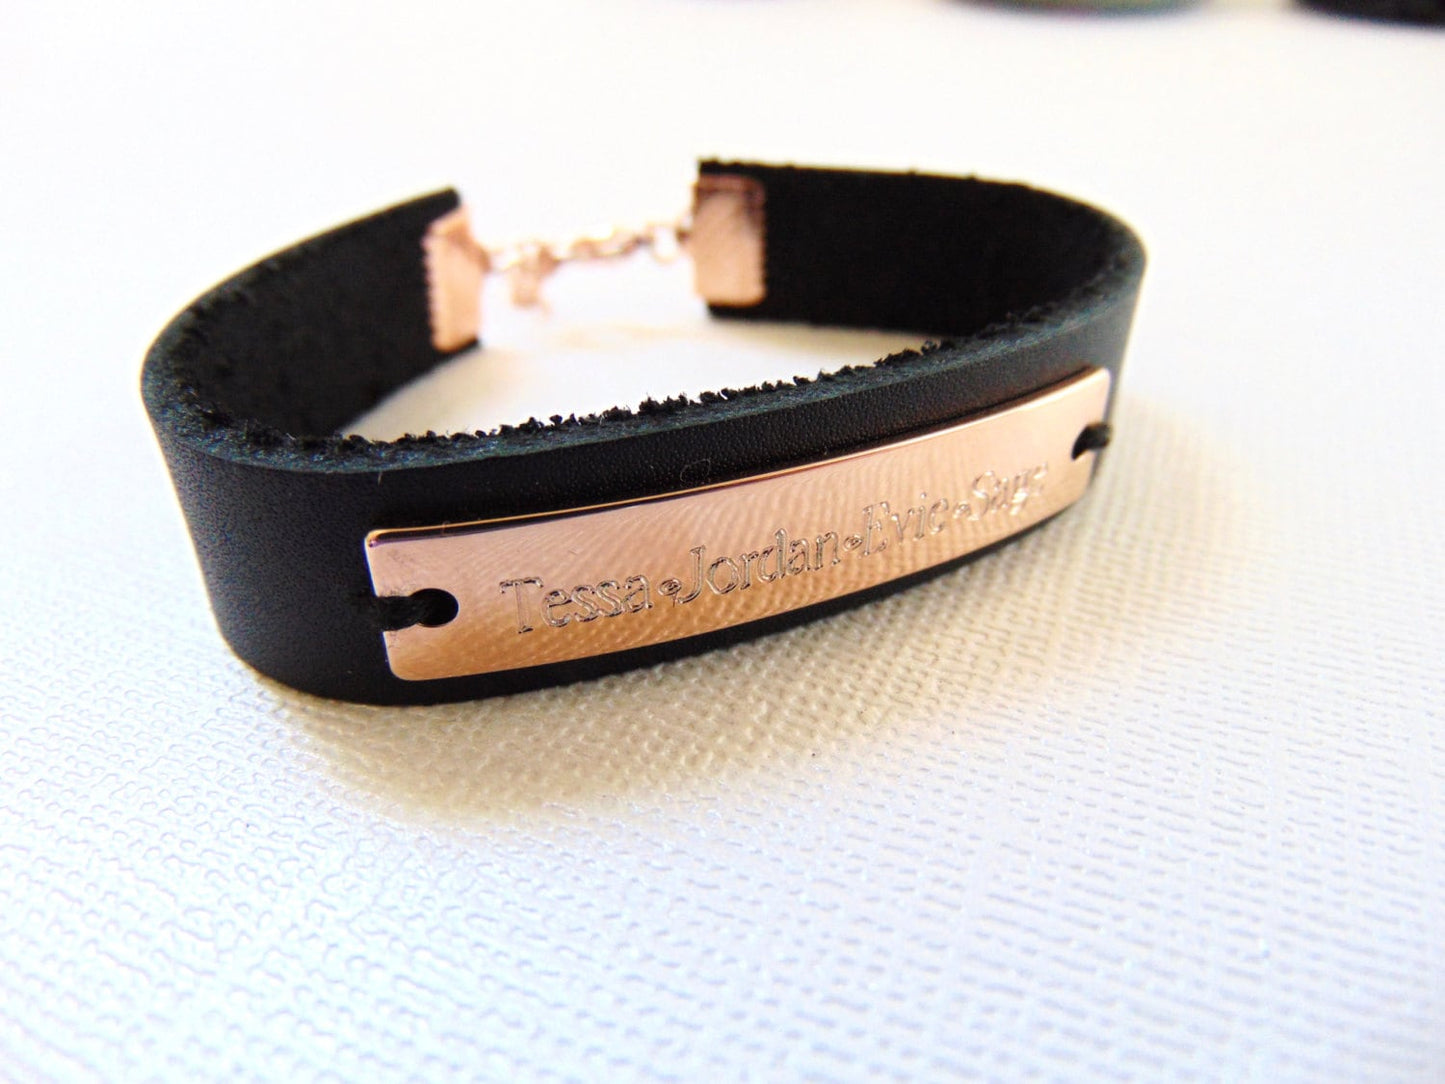 Customized engraving on rose gold cuff bracelet with black/brown leather